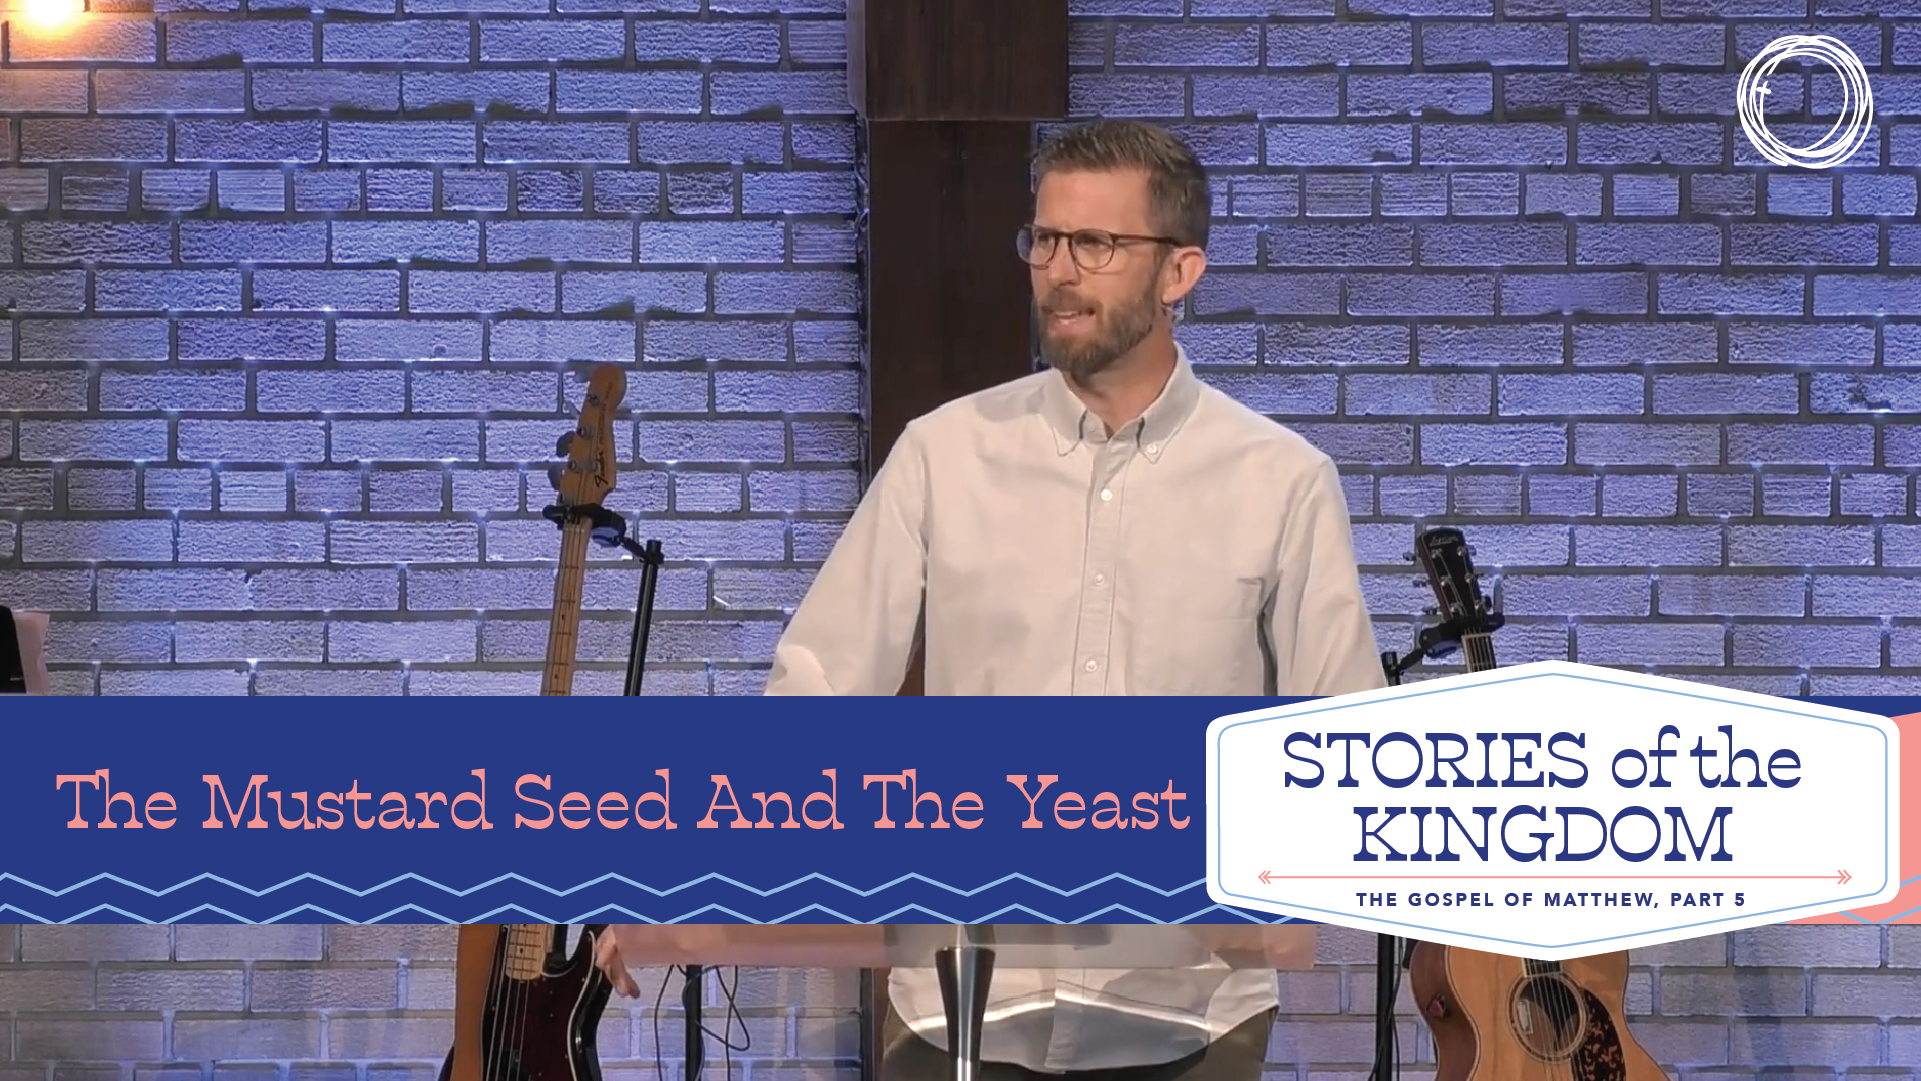 The Mustard Seed and the Yeast